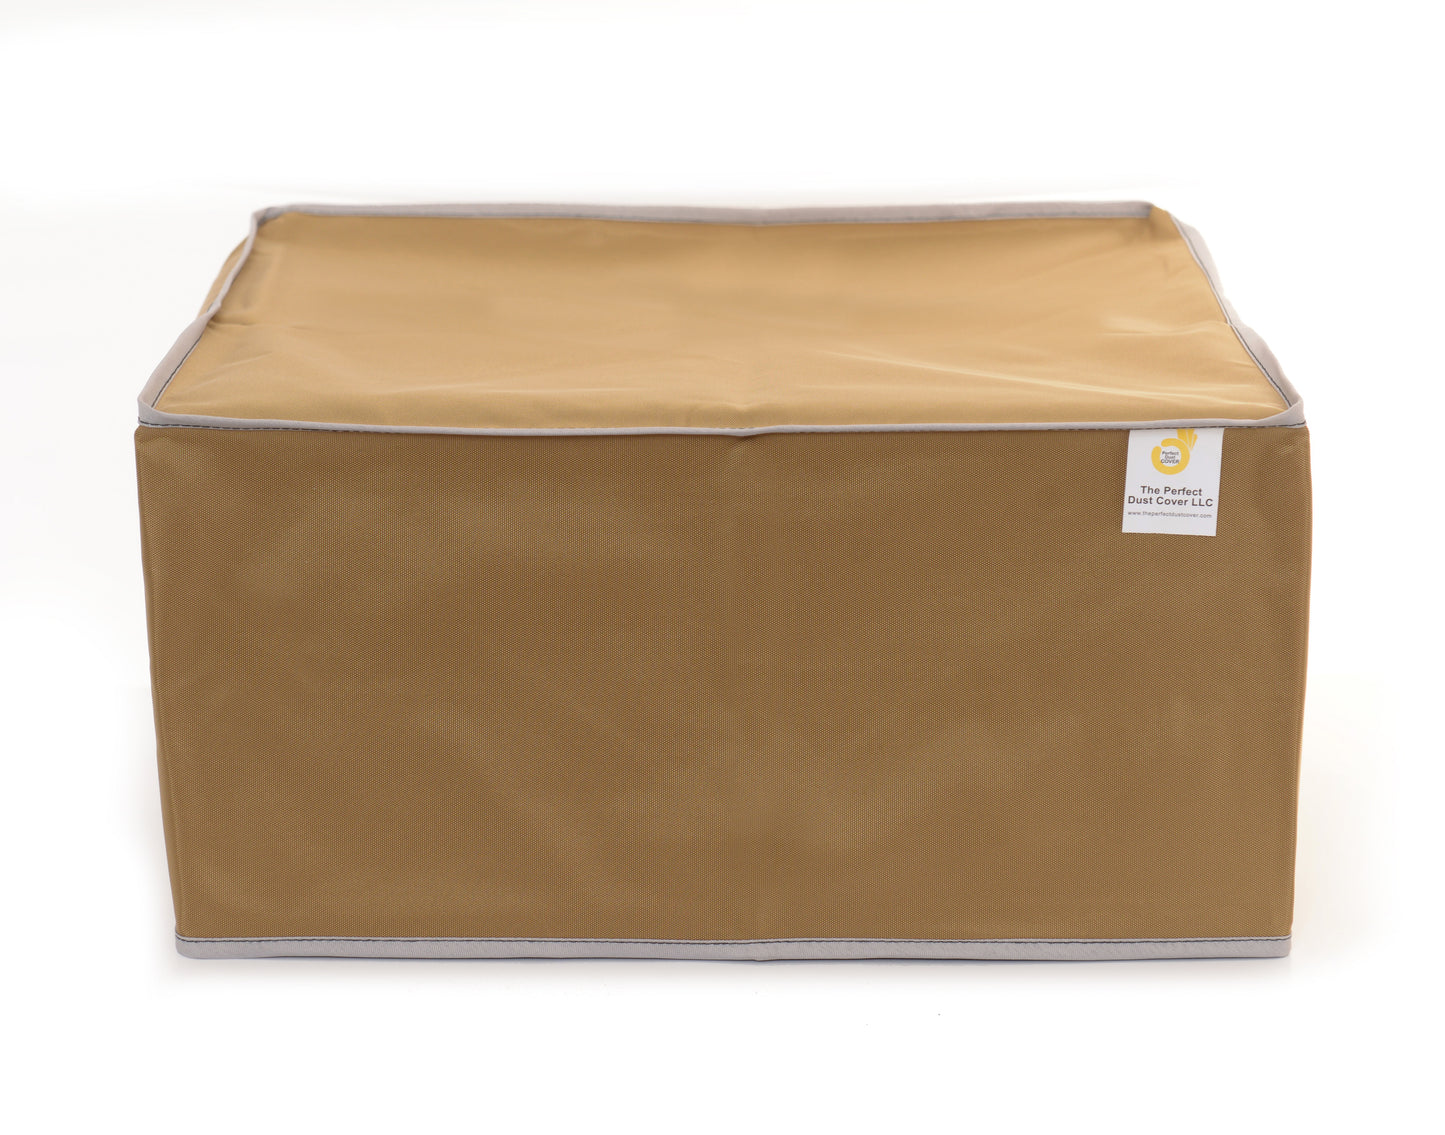 The Perfect Dust Cover, Tan Nylon Cover for Brother HL-L2380DW Monochrome Compact Laser Printer, Anti Static and Waterproof Cover Dimensions 16.1''W x 15.7''D x 10.5''H by The Perfect Dust Cover LLC